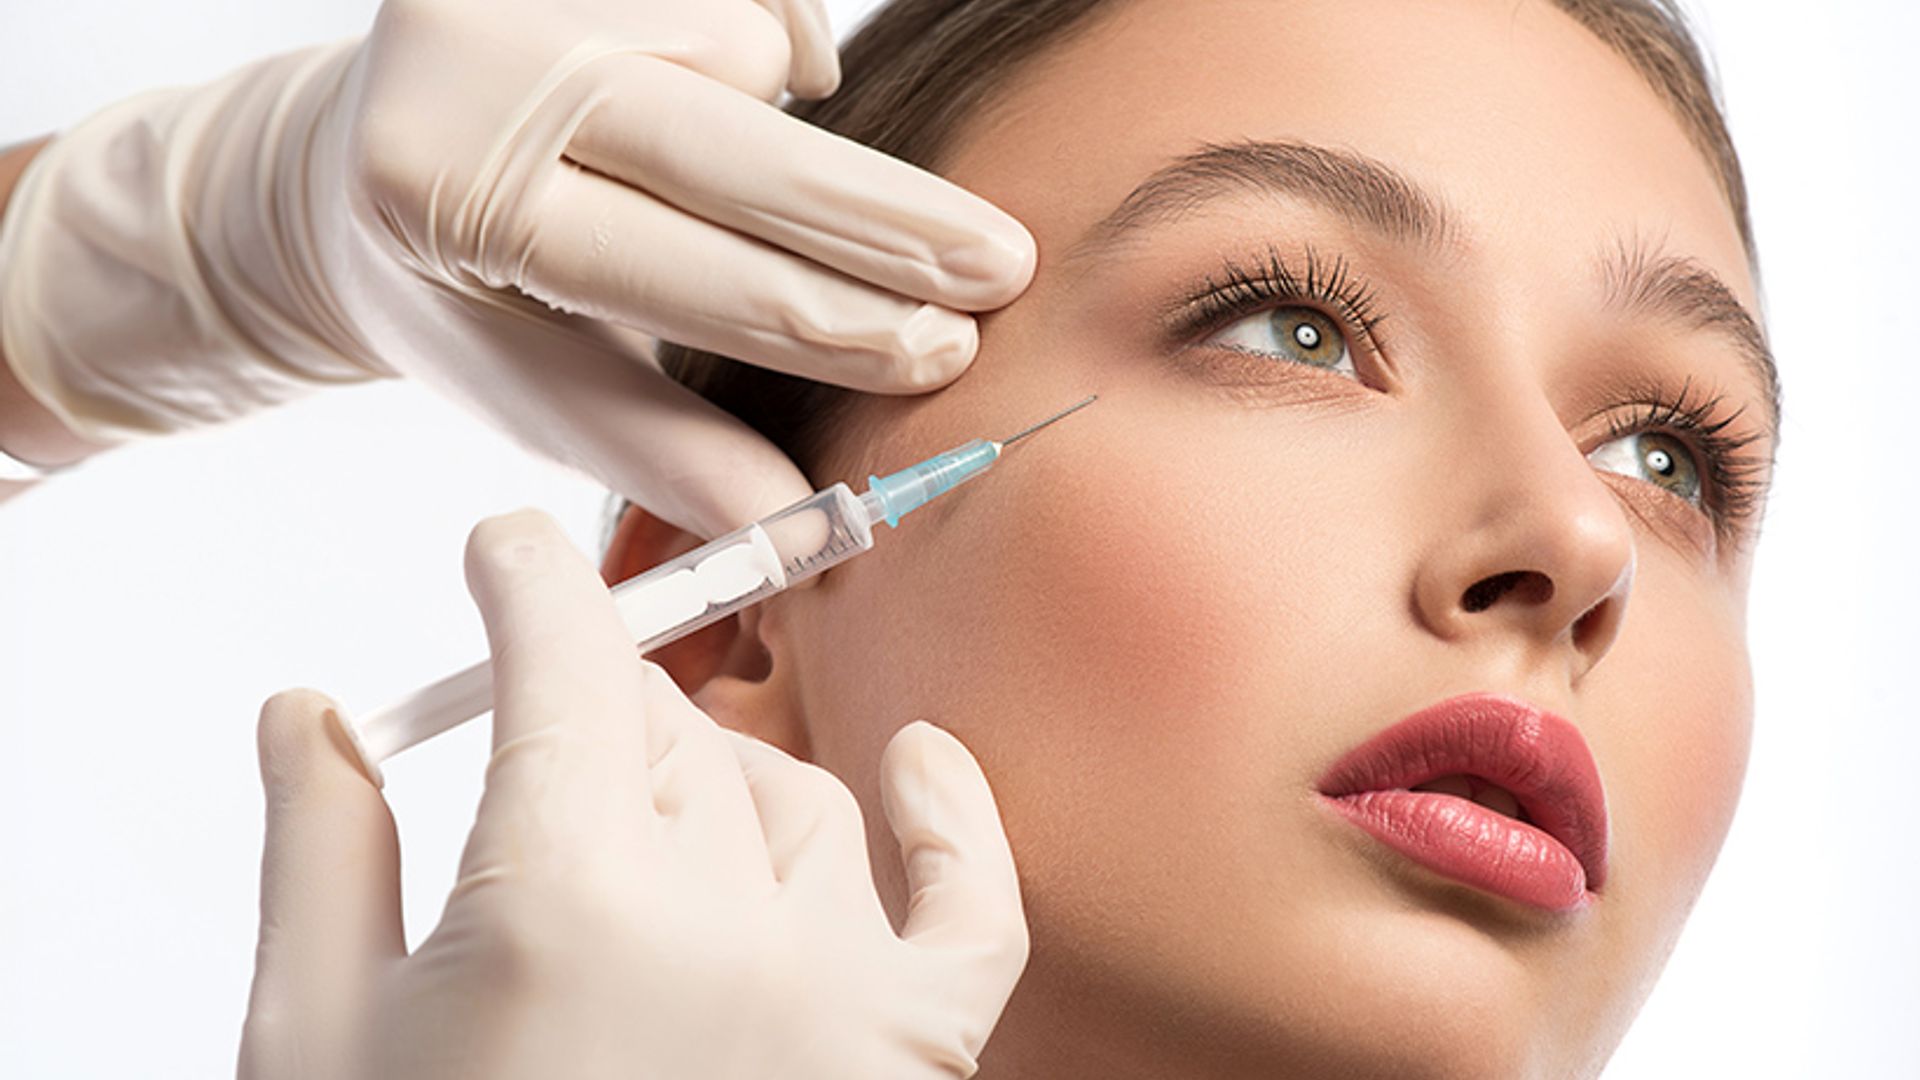 Dividing opinion: Superdrug’s new in-store Botox and fillers service